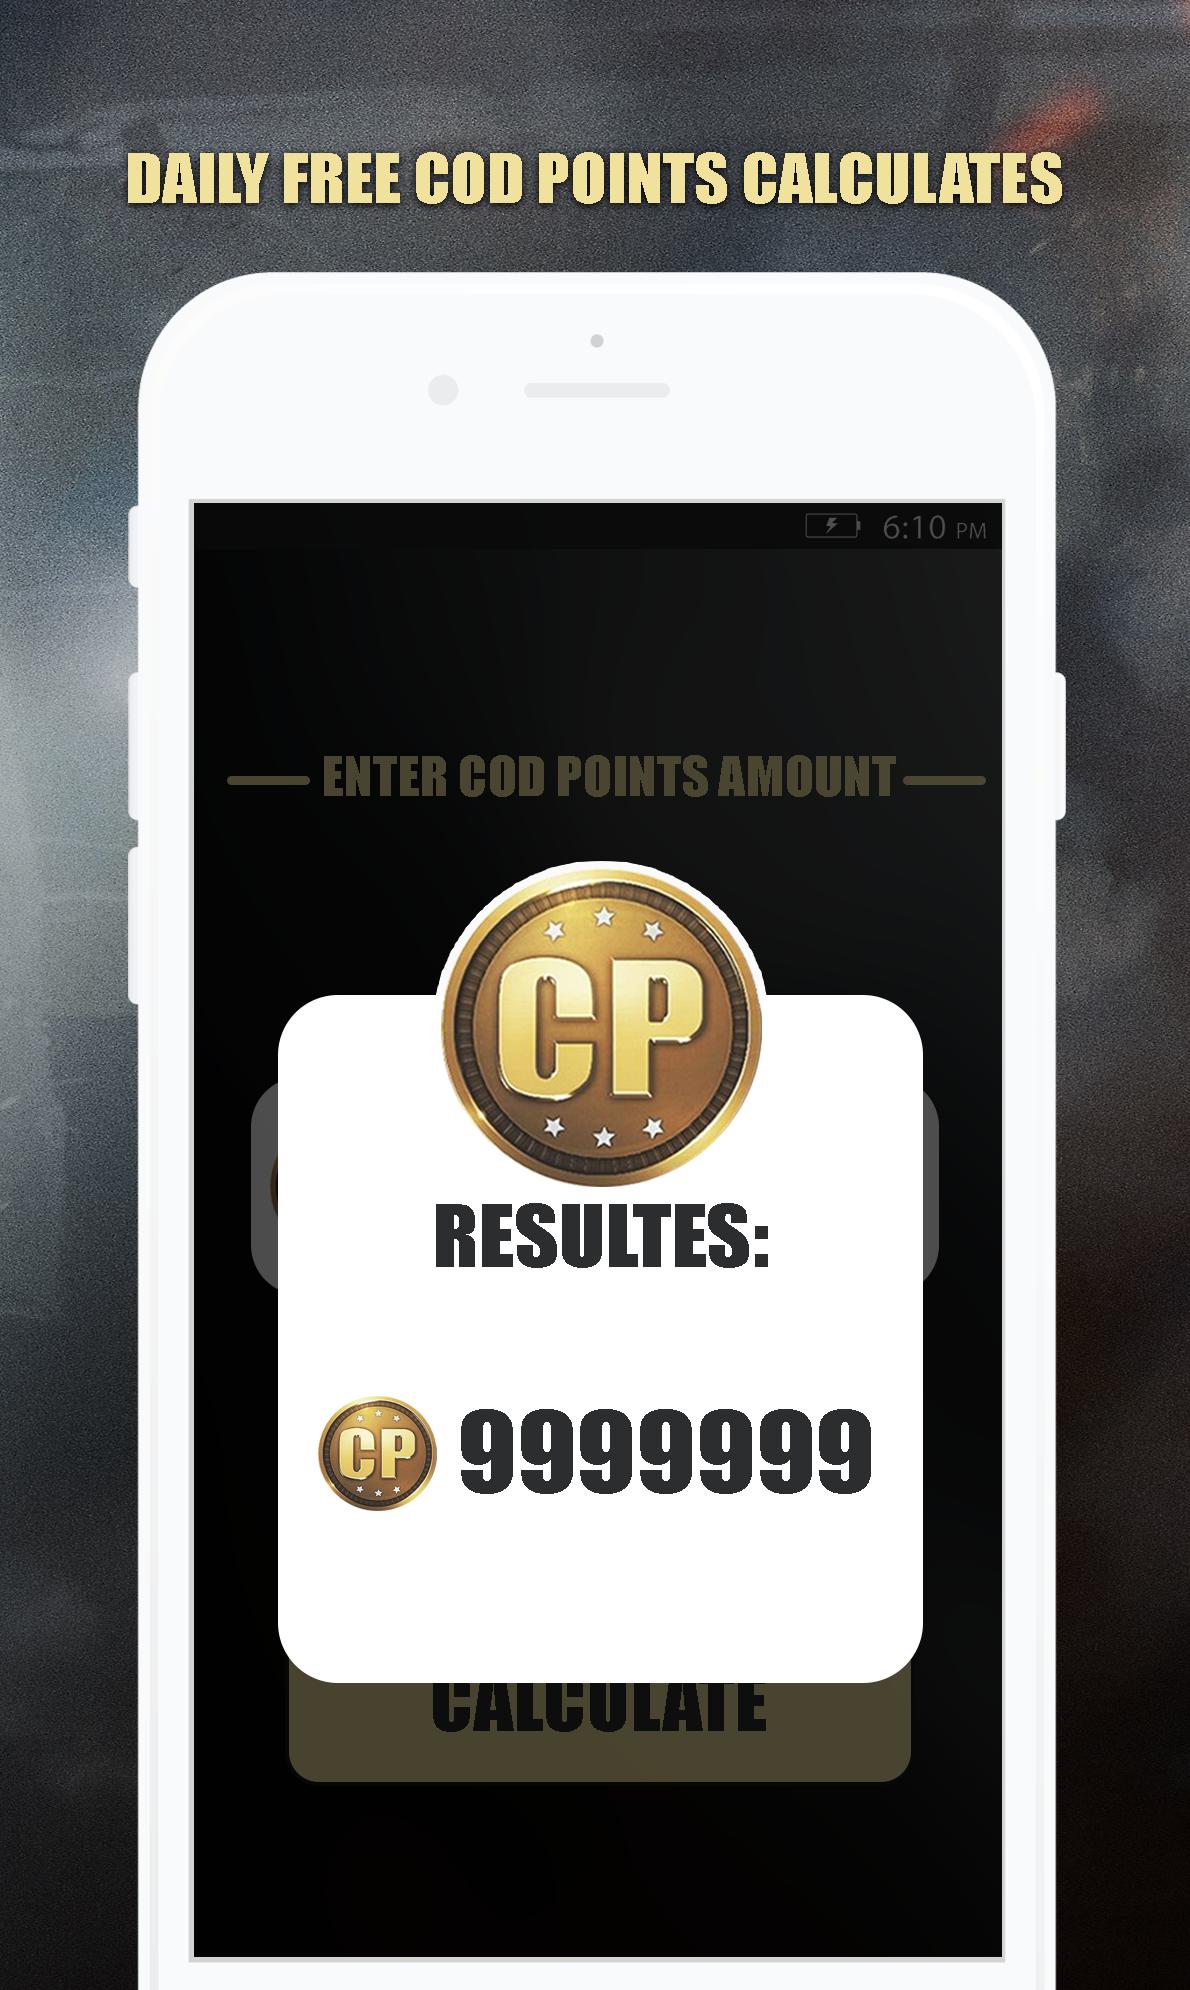 [Unlimited] Free Cod Points & Credits How To Install Call Of Duty Mobile In Tencent